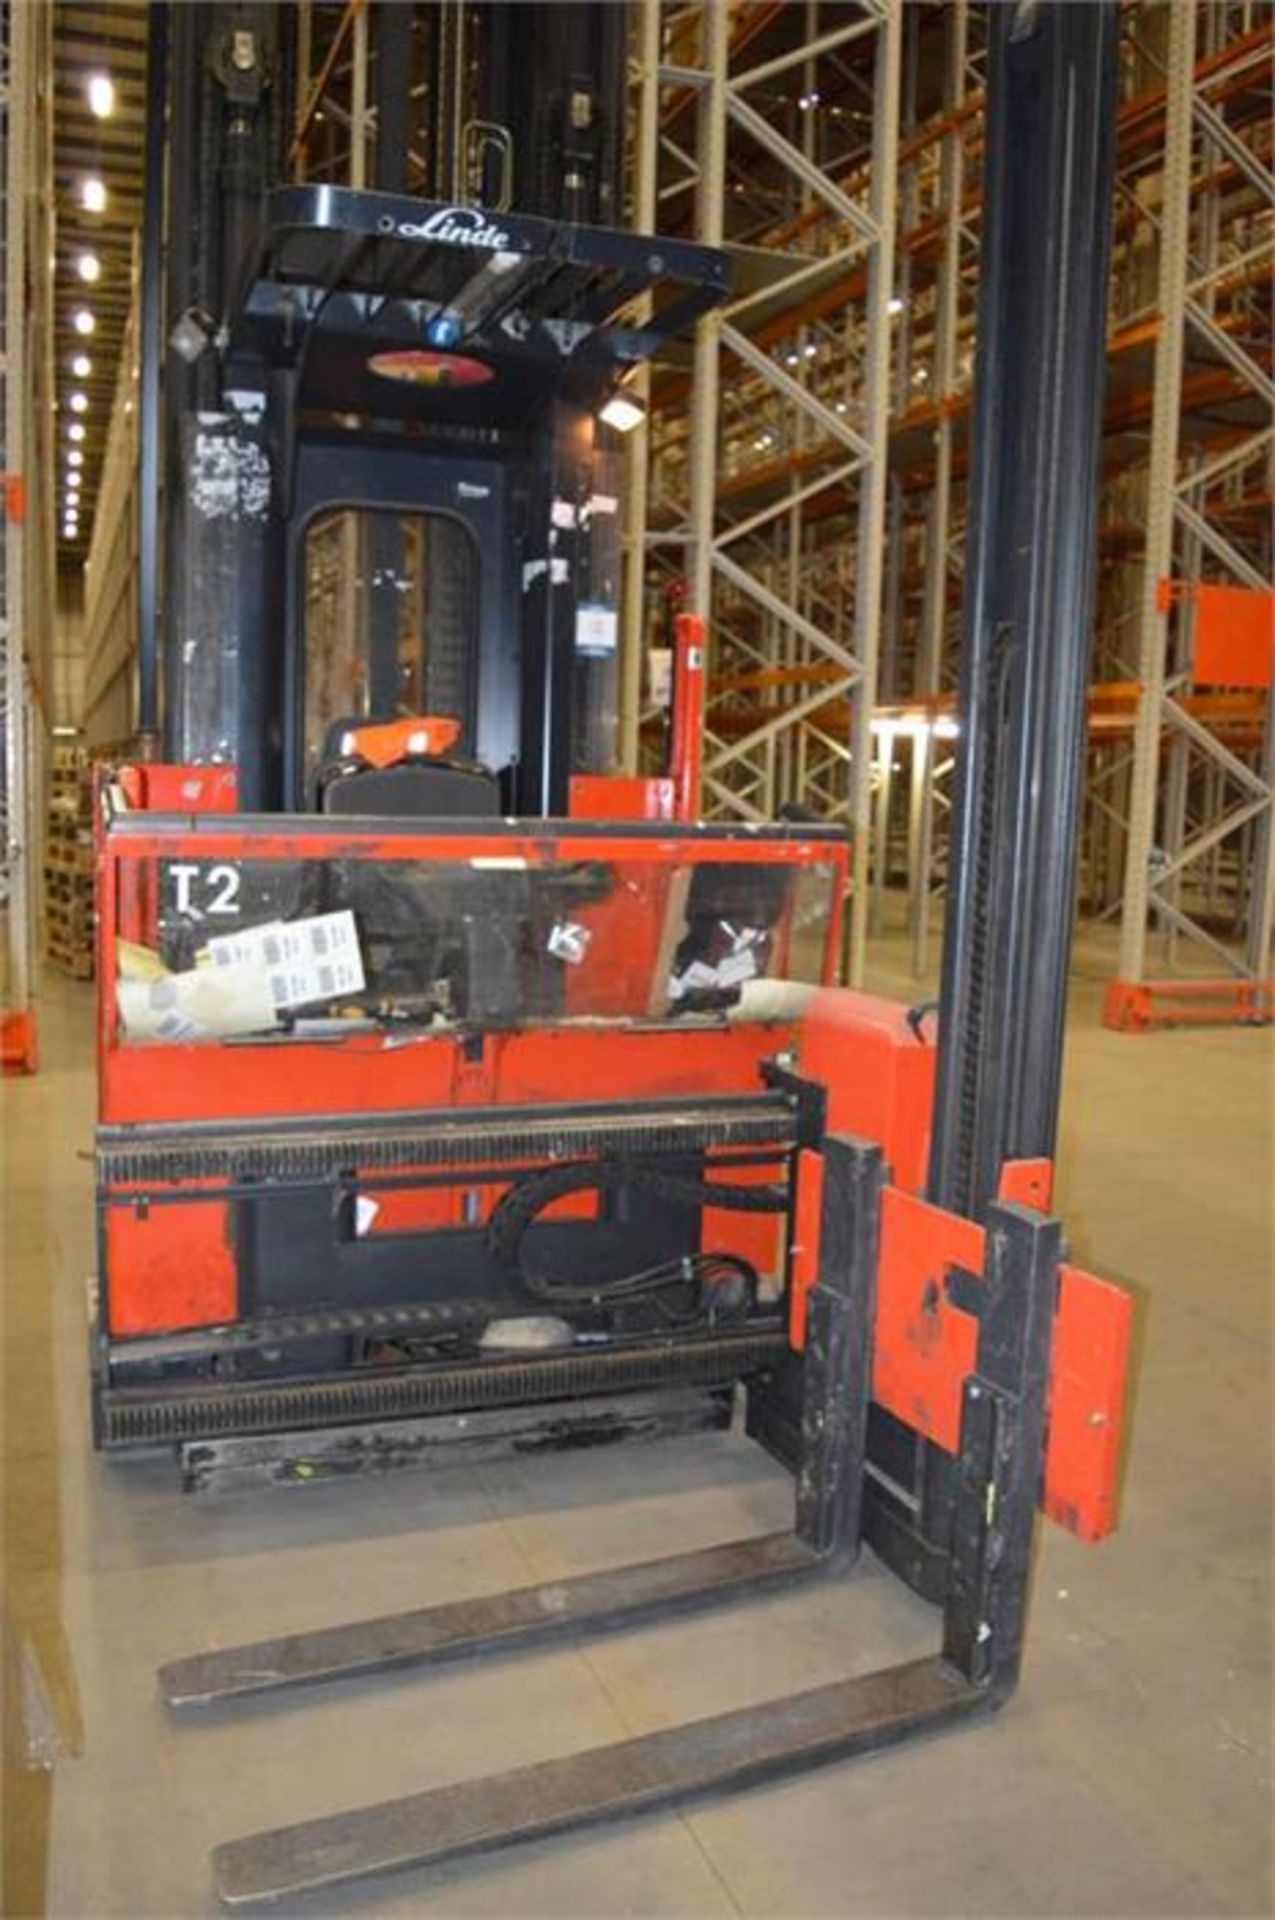 2010 Linde Electric Fork Lift Truck – Type K 1250kg Very narrow aisle electric high level order - Image 2 of 7